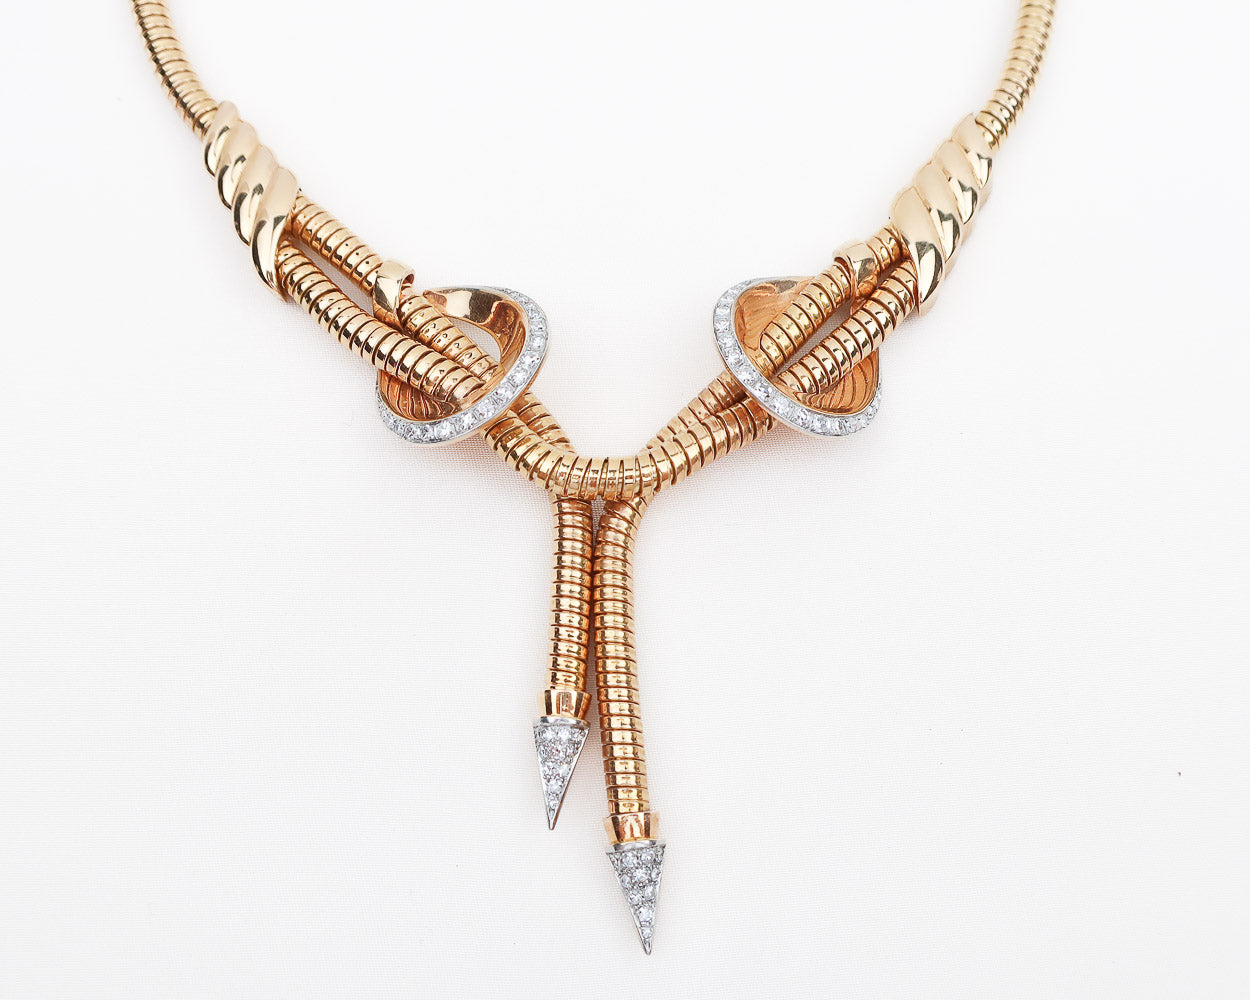 18KT Retro Necklace with Diamond Accents